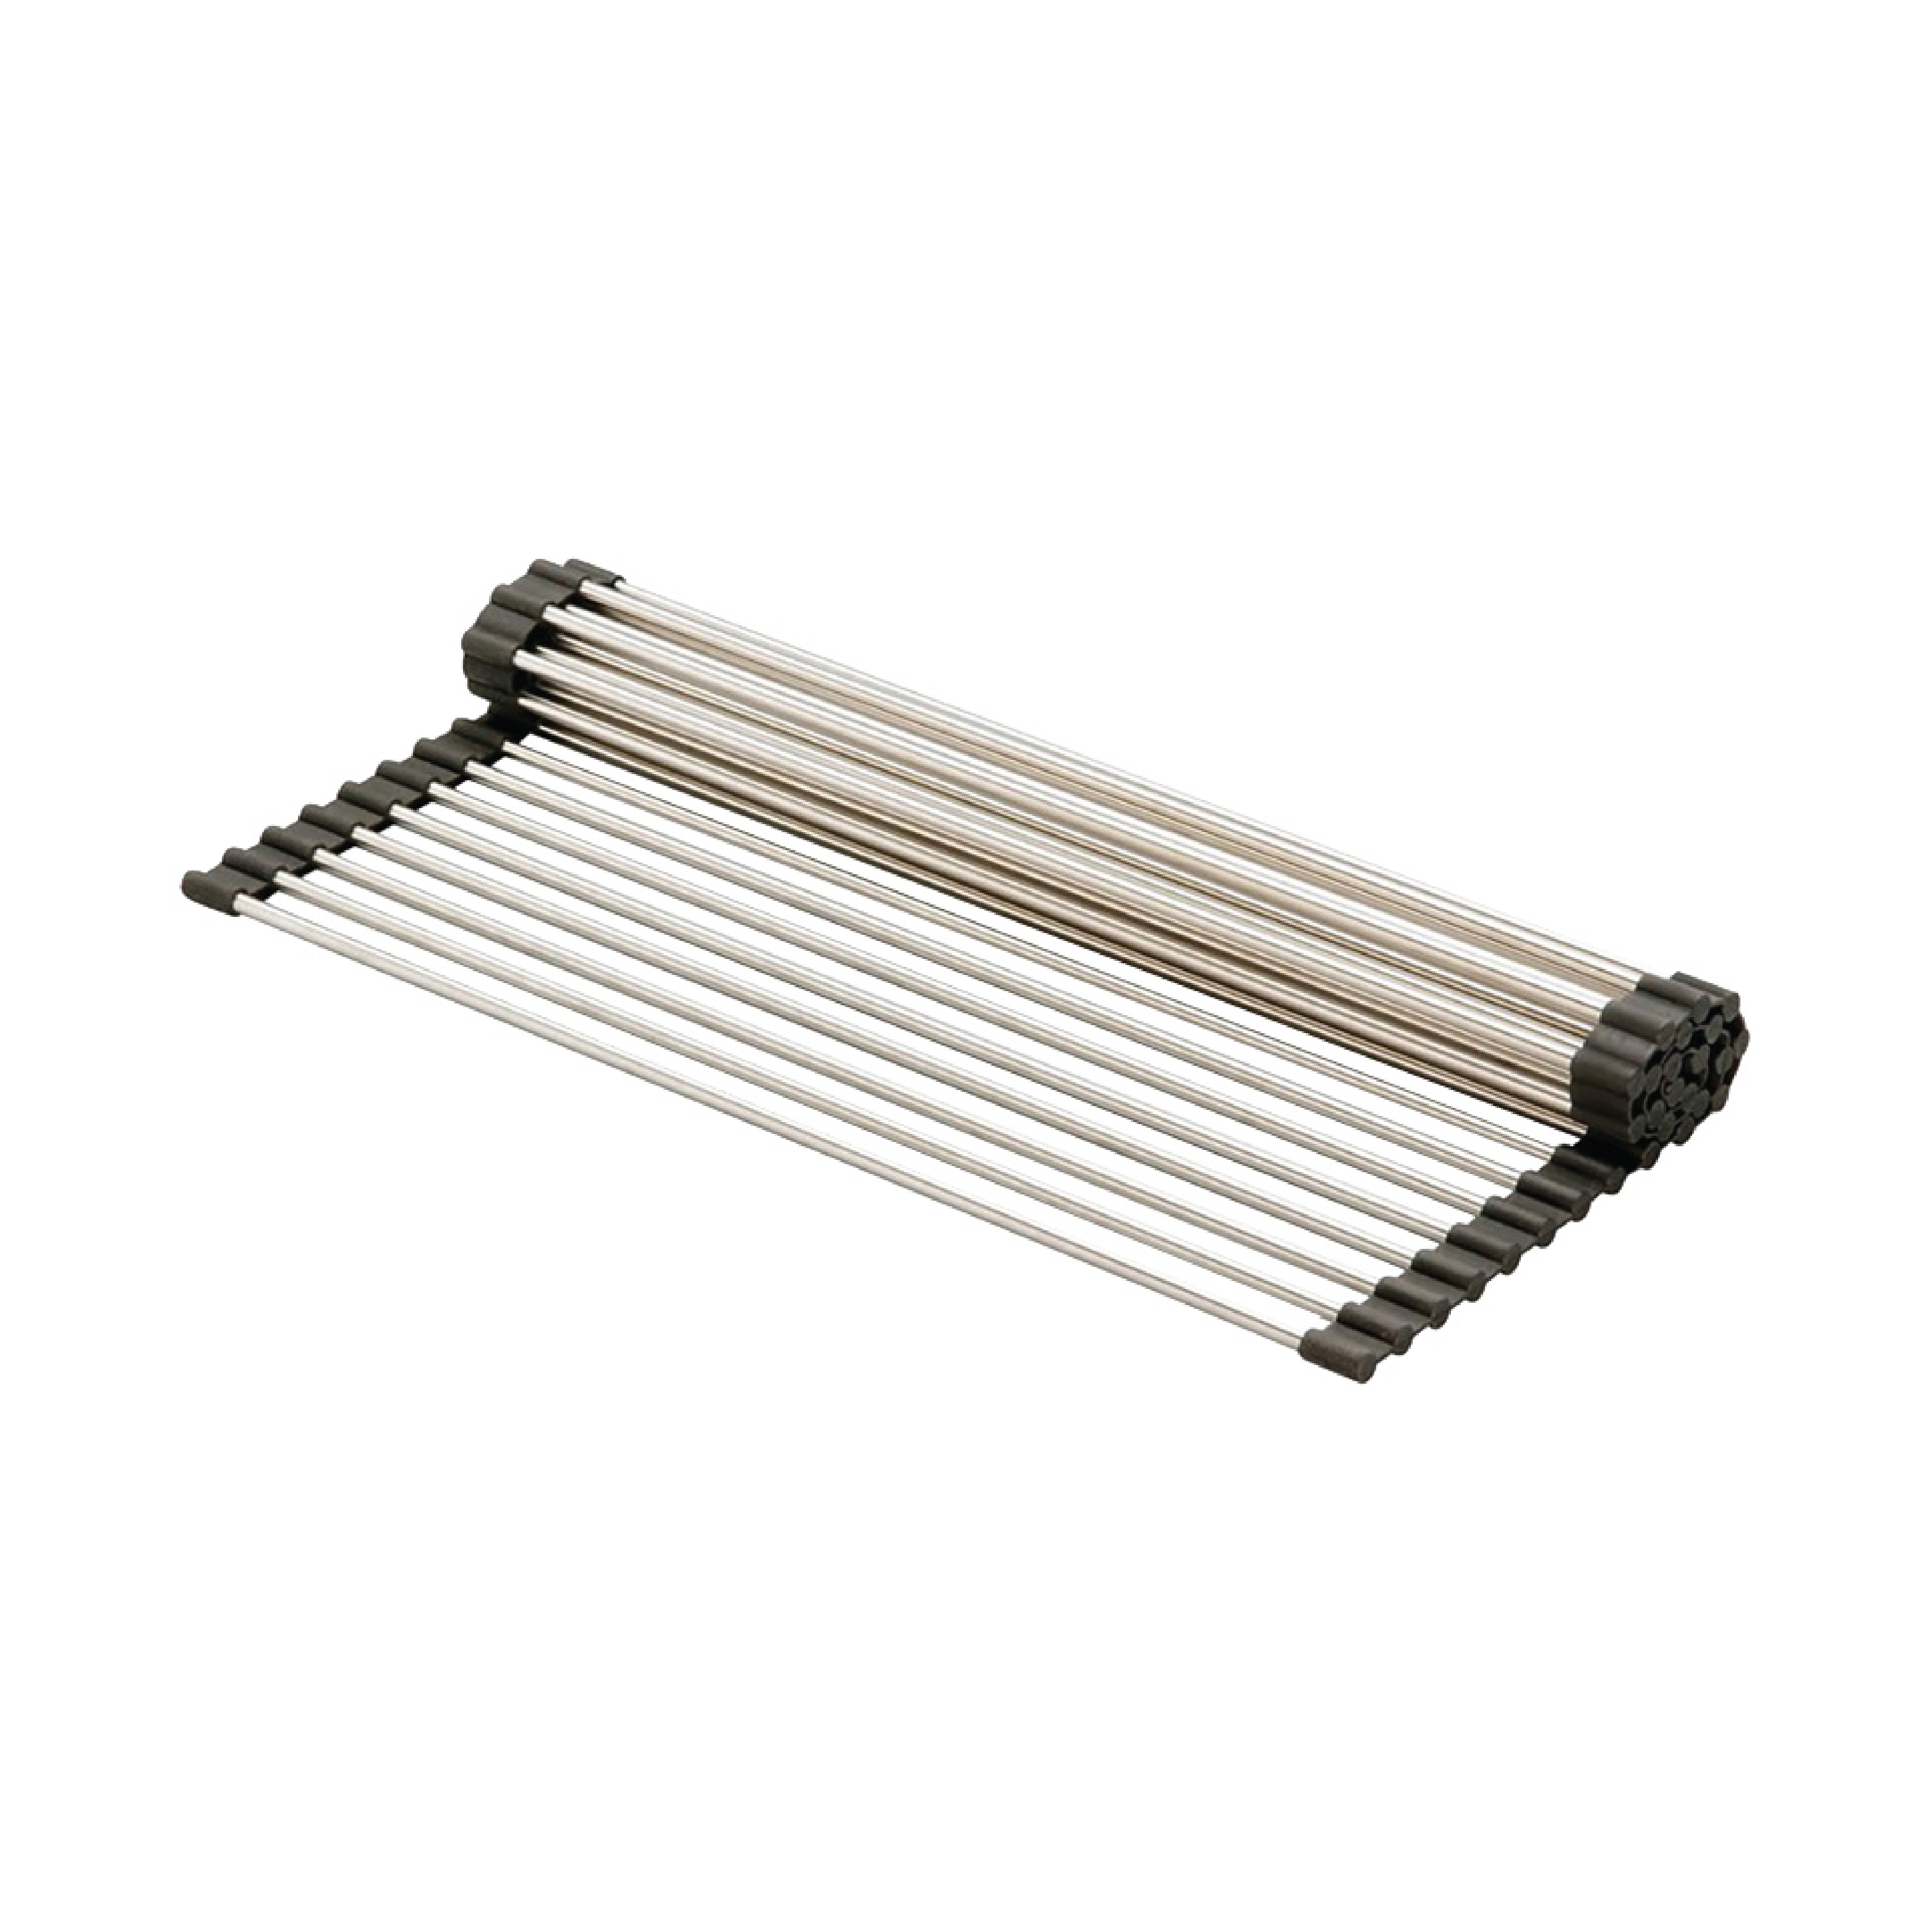 19" Stainless Steel Rolling Grid